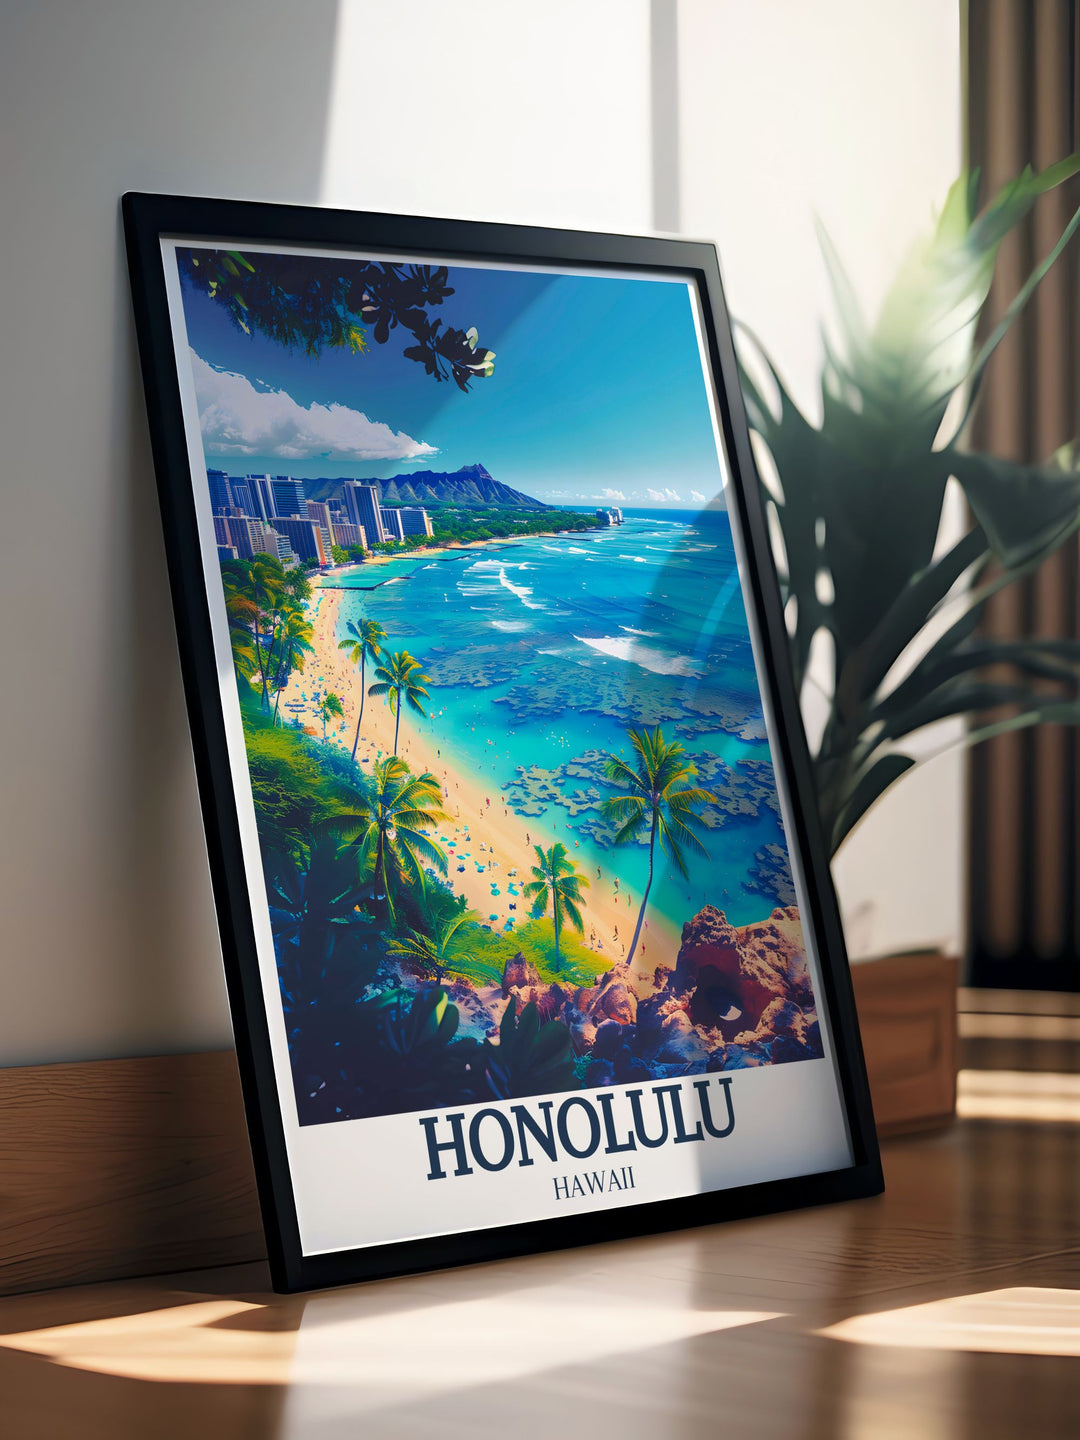 This fine art print of Honolulu showcases the stunning Waikiki Beach, featuring crystal clear waters, white sands, and the vibrant atmosphere of one of the worlds most famous beaches, making it perfect for tropical and beach themed decor.